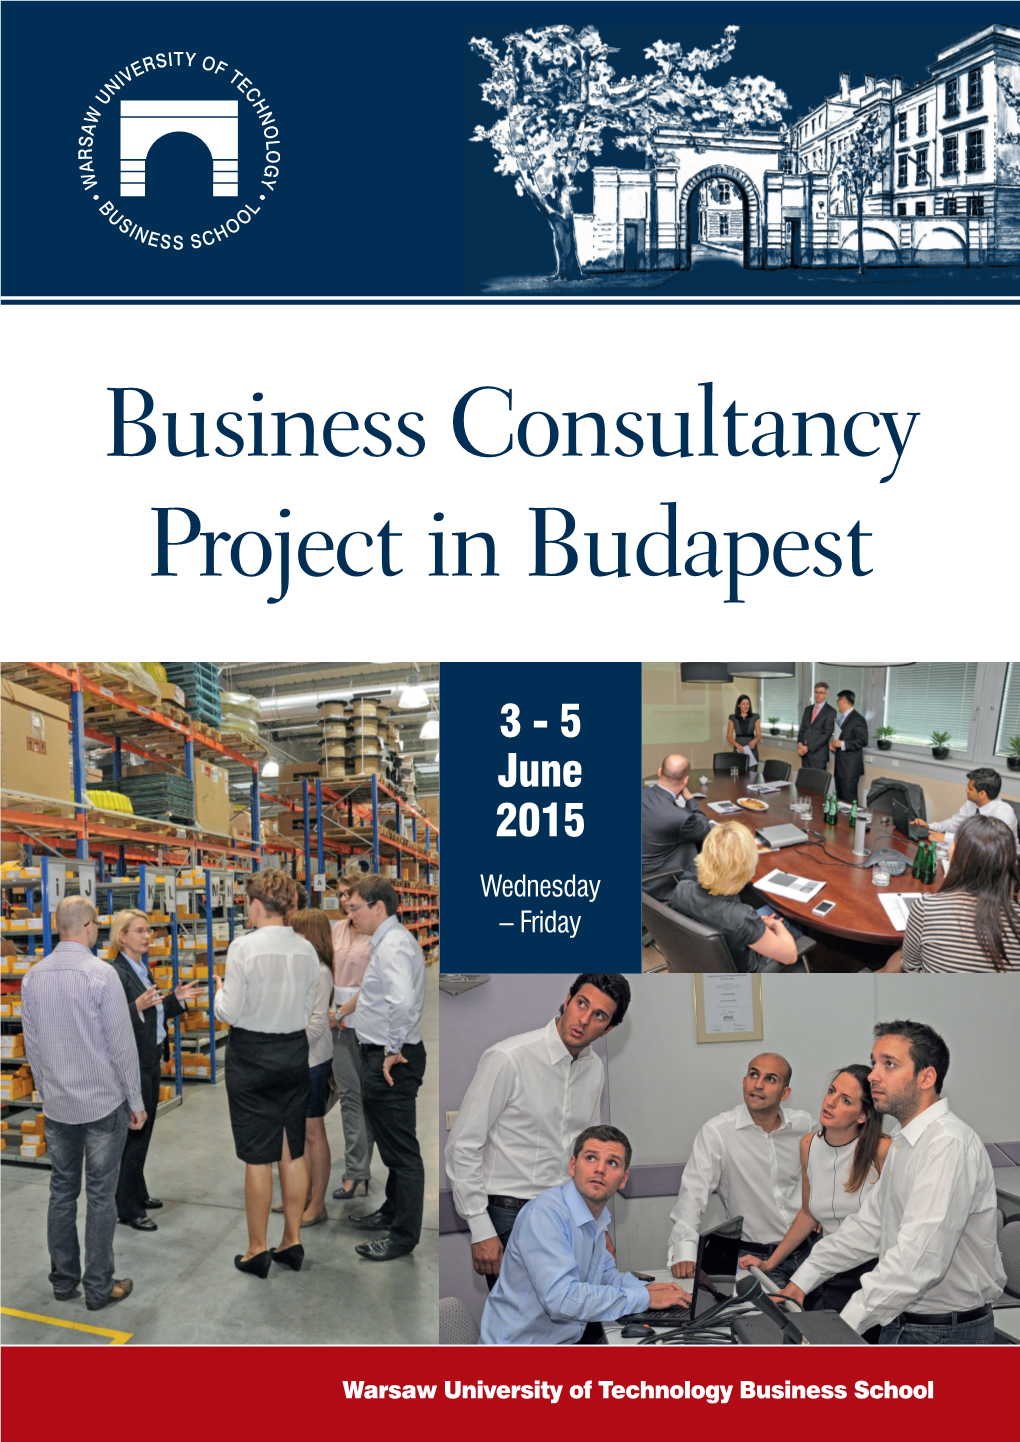 Business Consultancy Project in Budapest